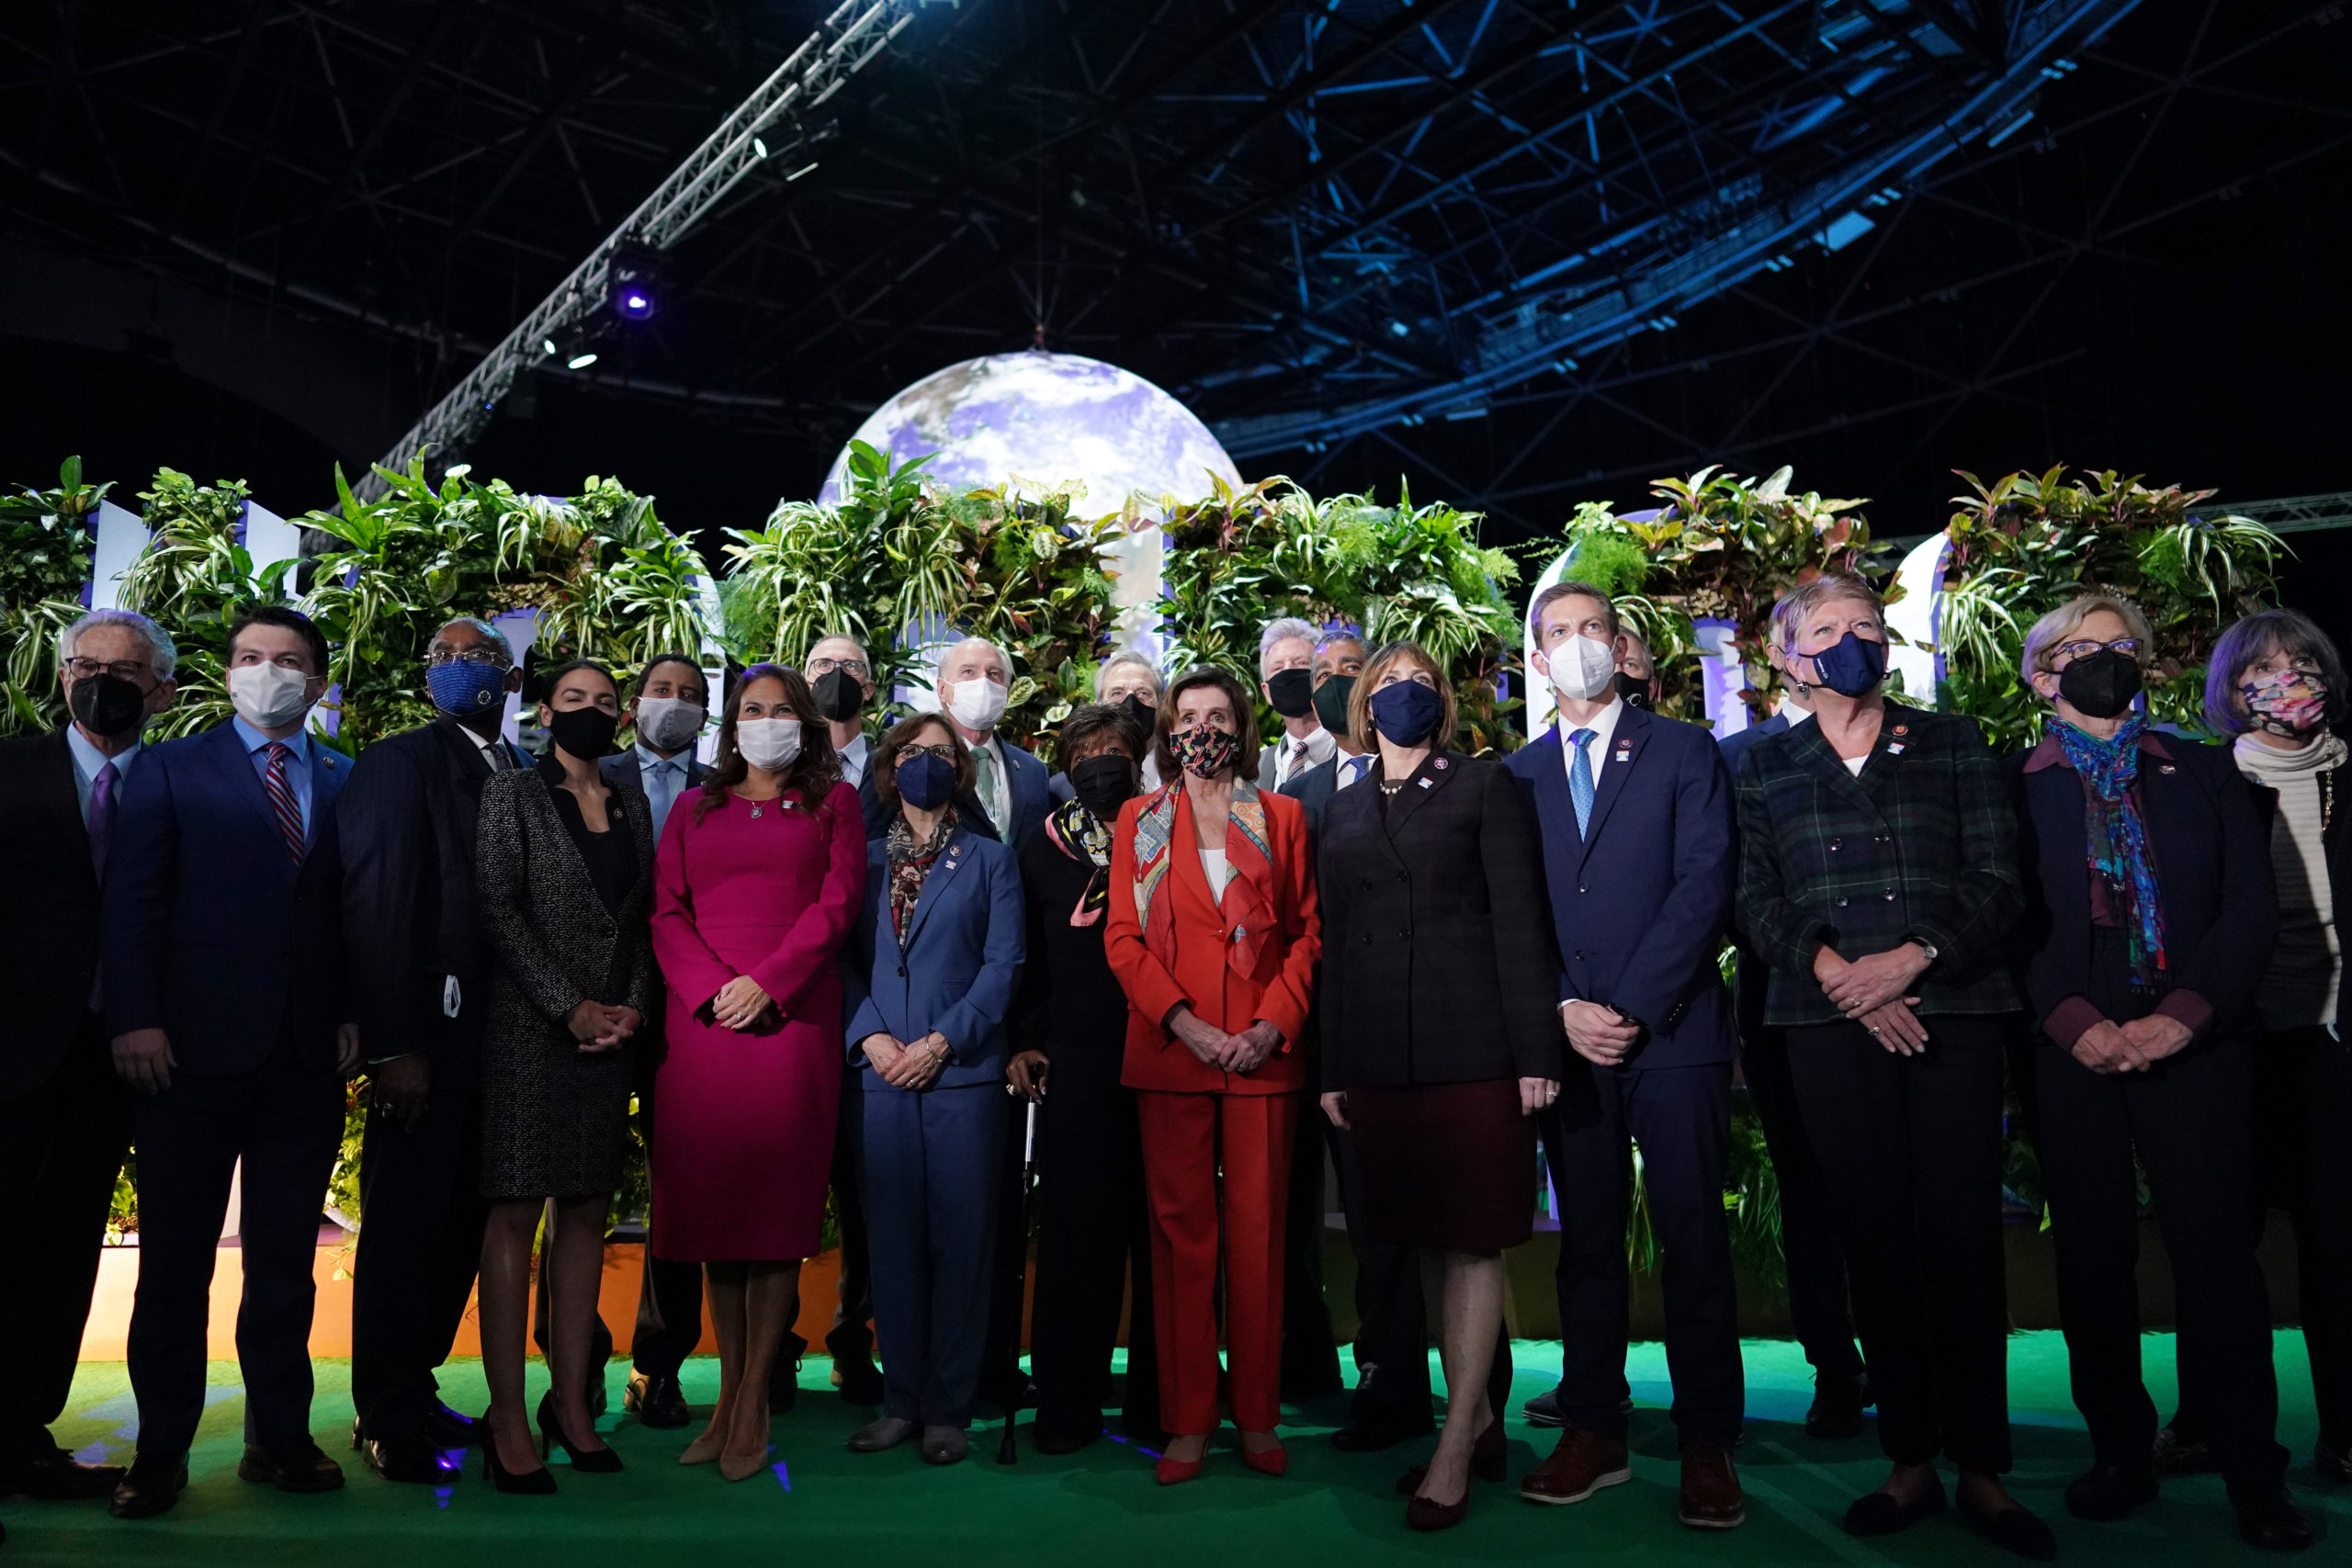 House Speaker Nancy Pelosi poses with the Democratic congressional delegation at COP26 on Tuesday in Glasgow, Scotland. (Ian Forsyth/Getty Images)